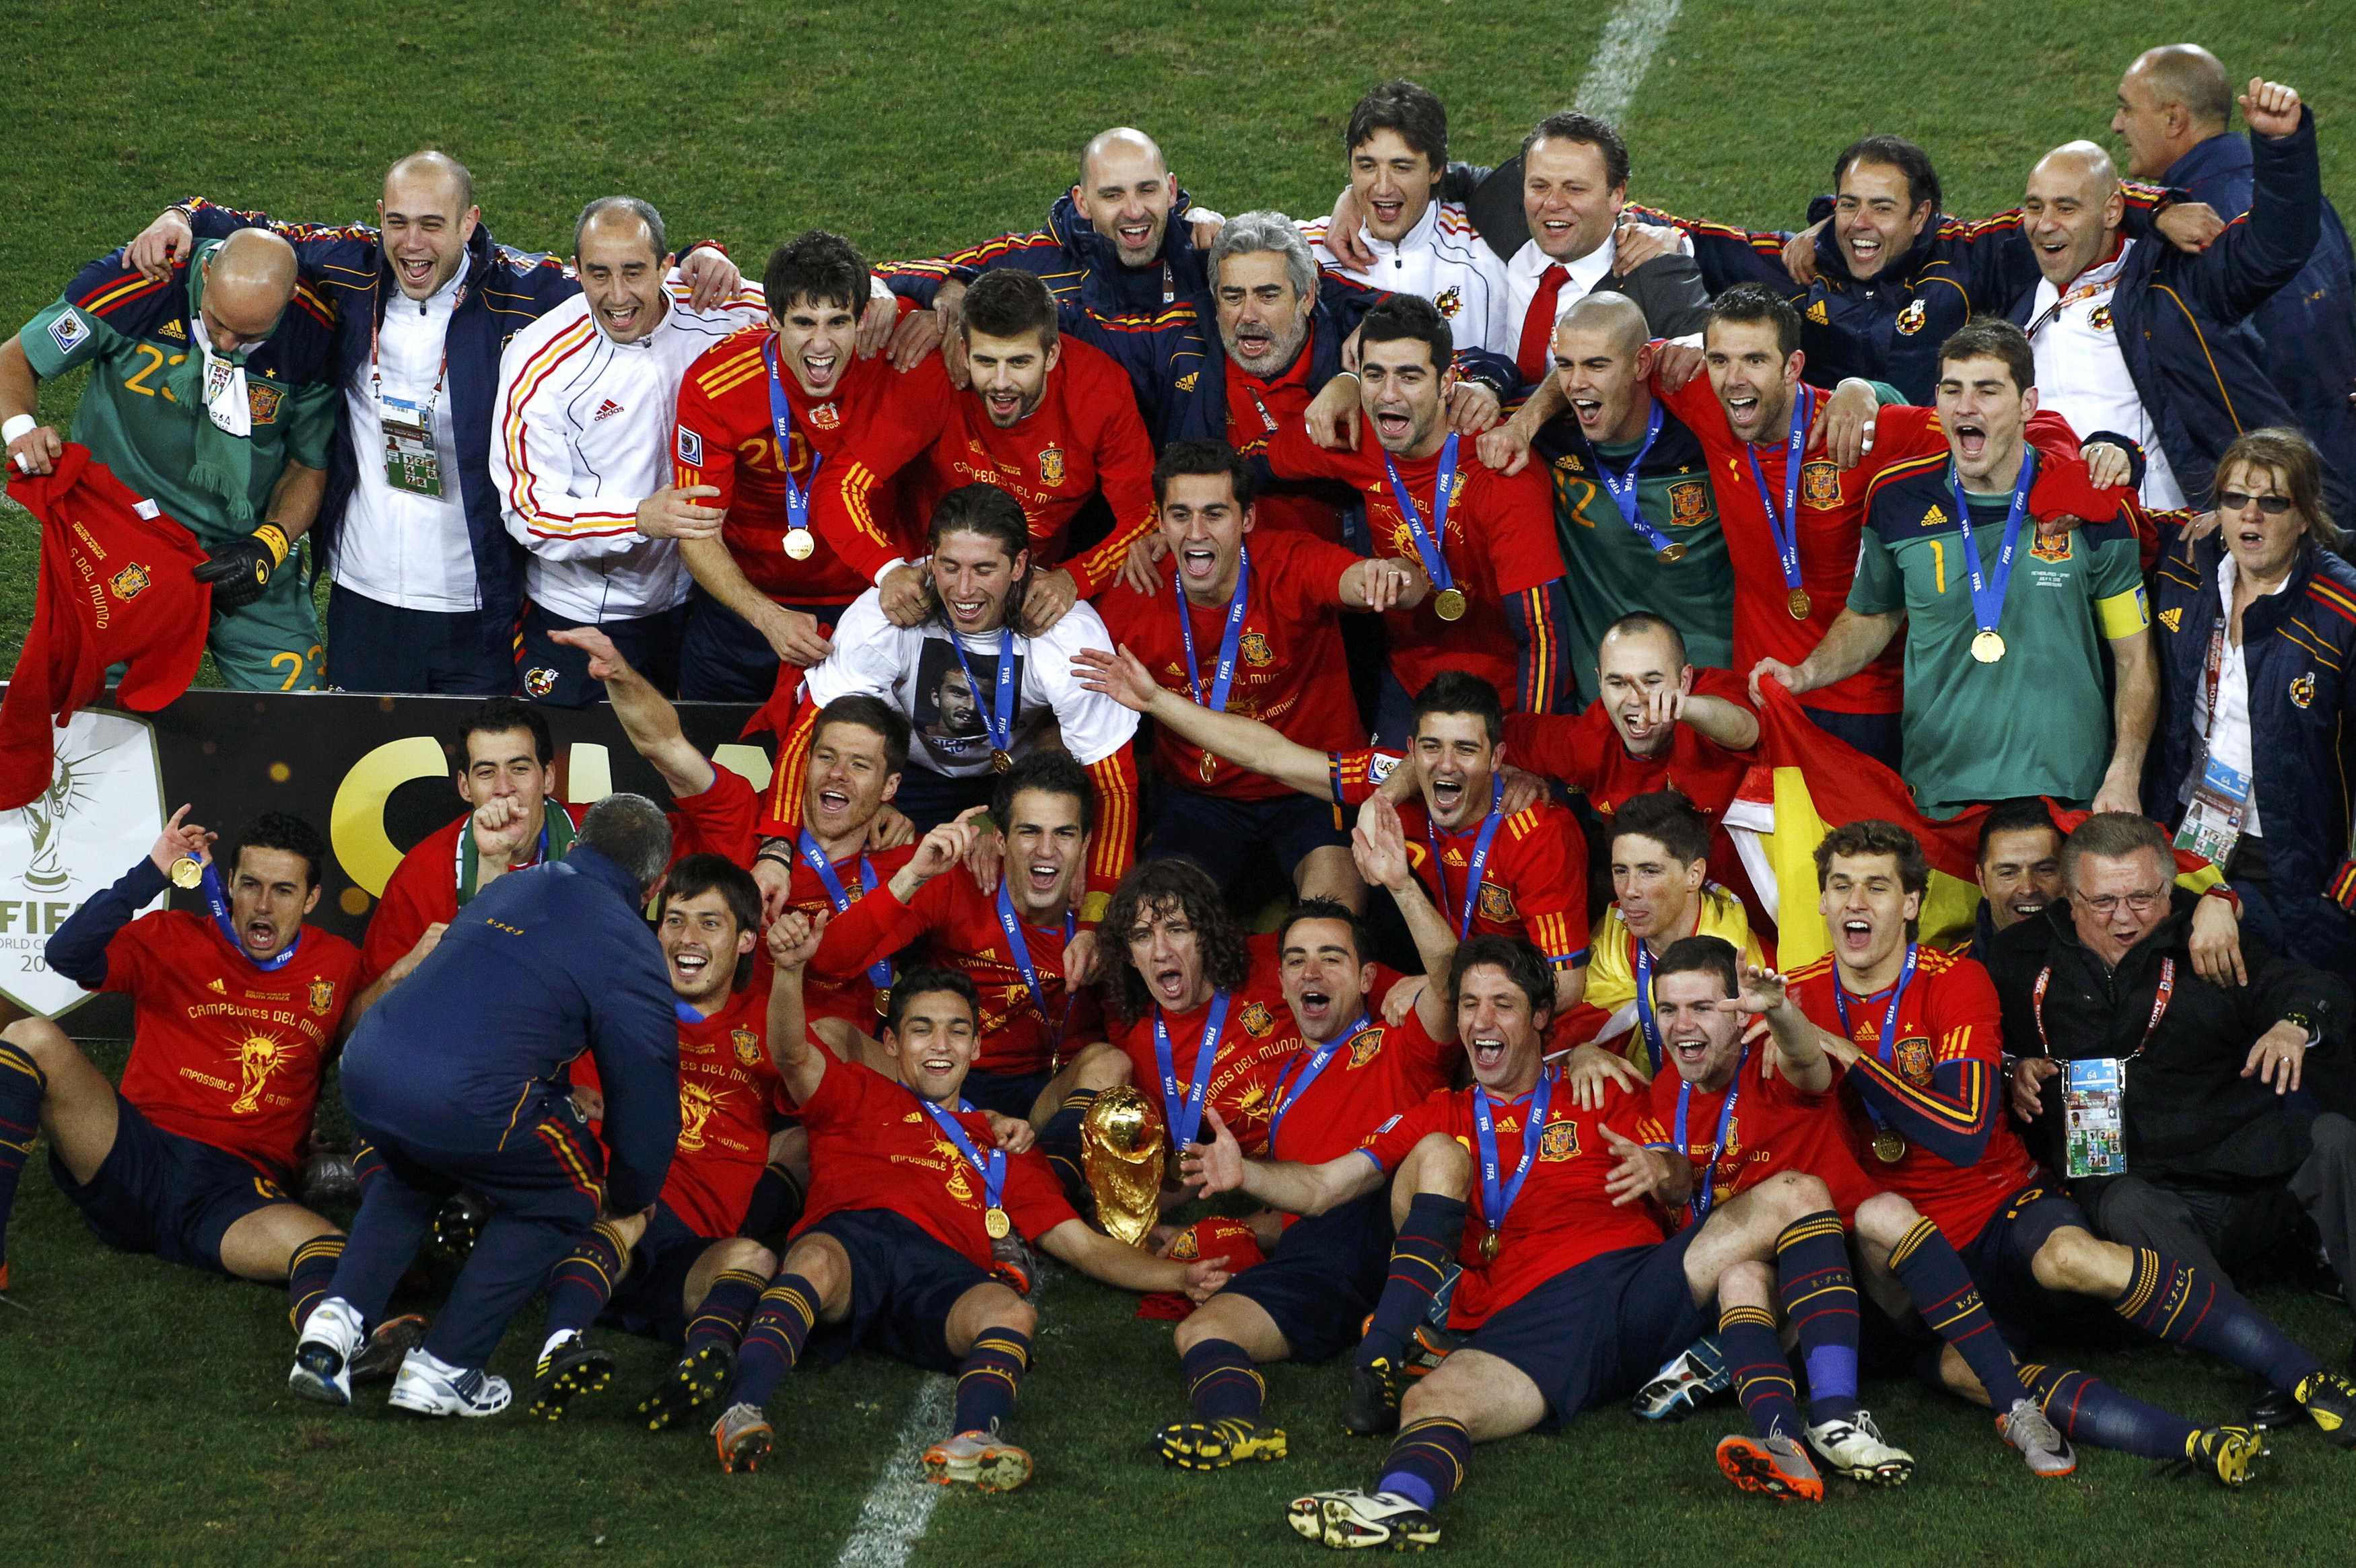 Spain's soccer team celebrates with World Cup trophy after their final match victory over Netherlands, during award ceremony at Soccer City stadium in Johannesburg